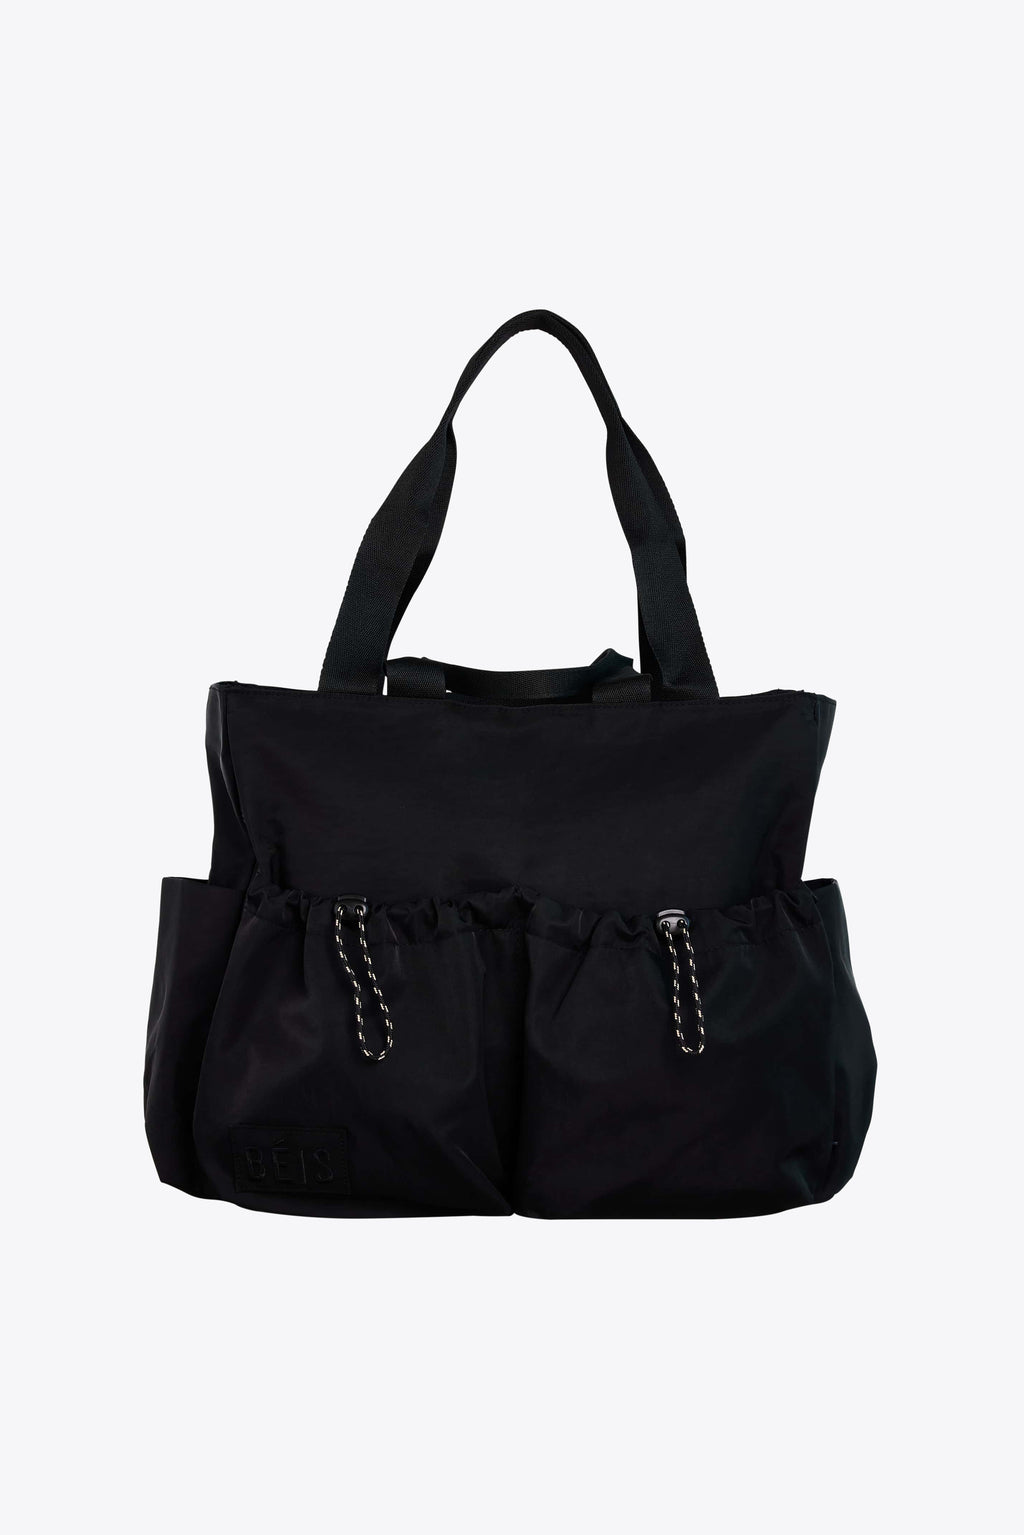 BÉIS 'The Sport Carryall' in Black - Chic Tennis Tote